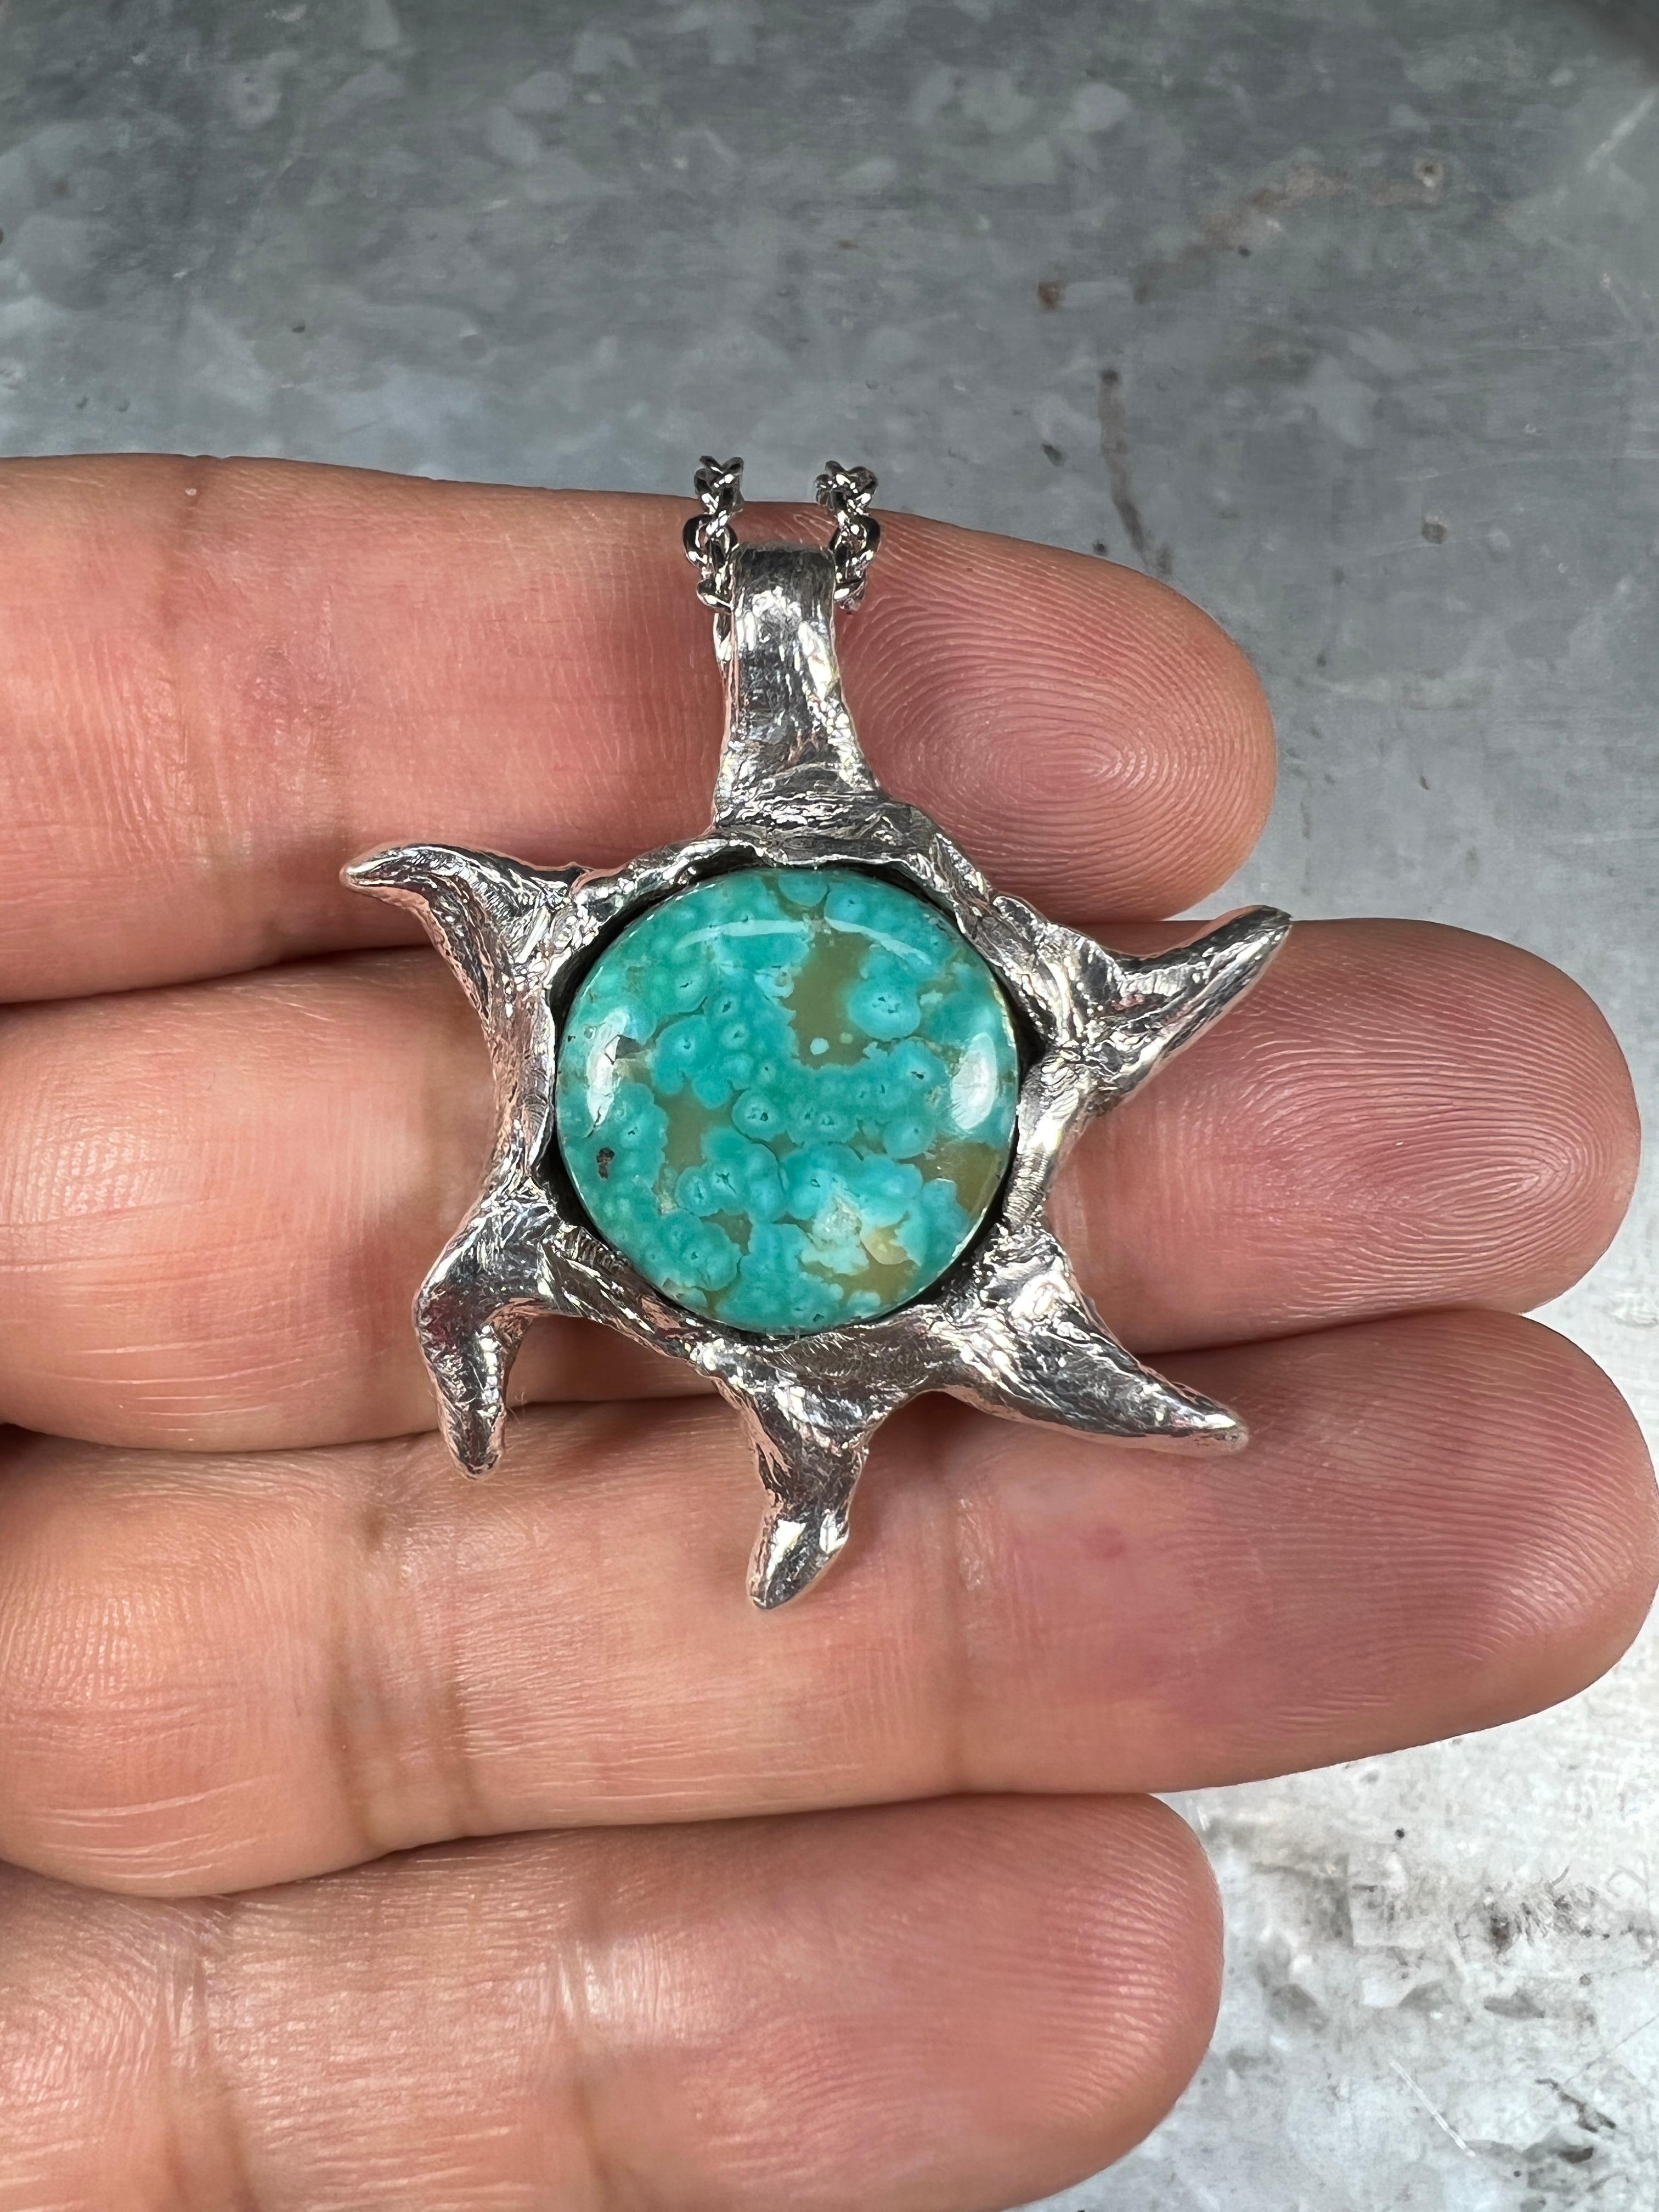 This one-of-a-kind pendant is hand-carved, cast in sterling silver, and features a Manassa Turquoise stone from Colorado. 

Pendant size: 38mm x 33mm

Hand-signed

Pendant only; chain not included.